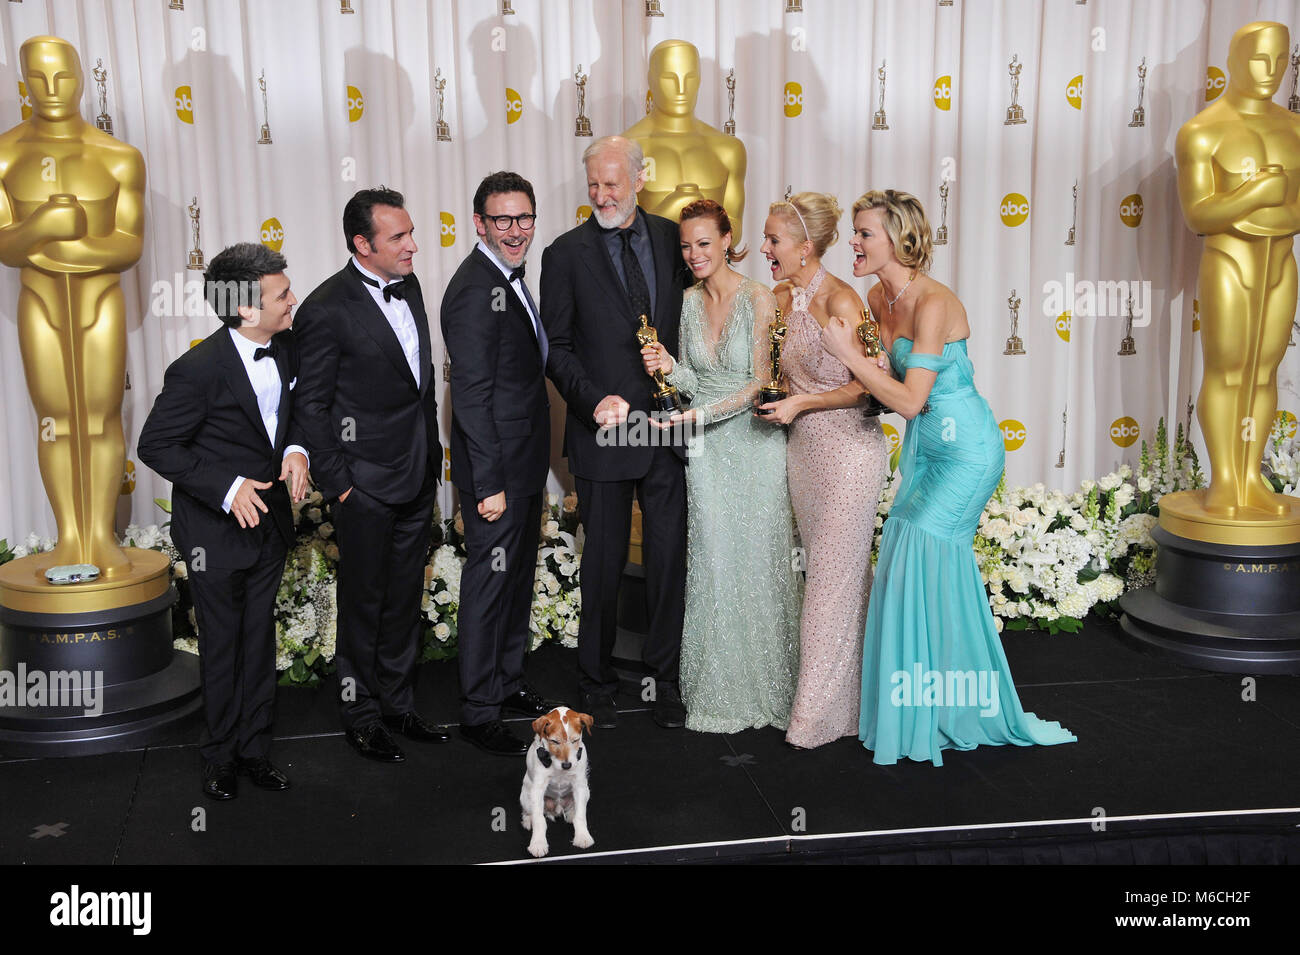 Michel Hazanavicius, Missi Pyle , Jean Dujardin, P A Miller, J Cromwell, 139  press room at the Oscar - 84th Academy Awards at the Hollywood and Highland Theatre in Los Angeles.Michel Hazanavicius, Missi Pyle , Jean Dujardin, P A Miller, J Cromwell, 139 84th Academy of Motion Picture Oscar Awards  2012. Oscar Trophy, Oscar Press Room 2012, winner with trophy in 2012, Oscar Statue 2012  84th Oscars Press Room Stock Photo